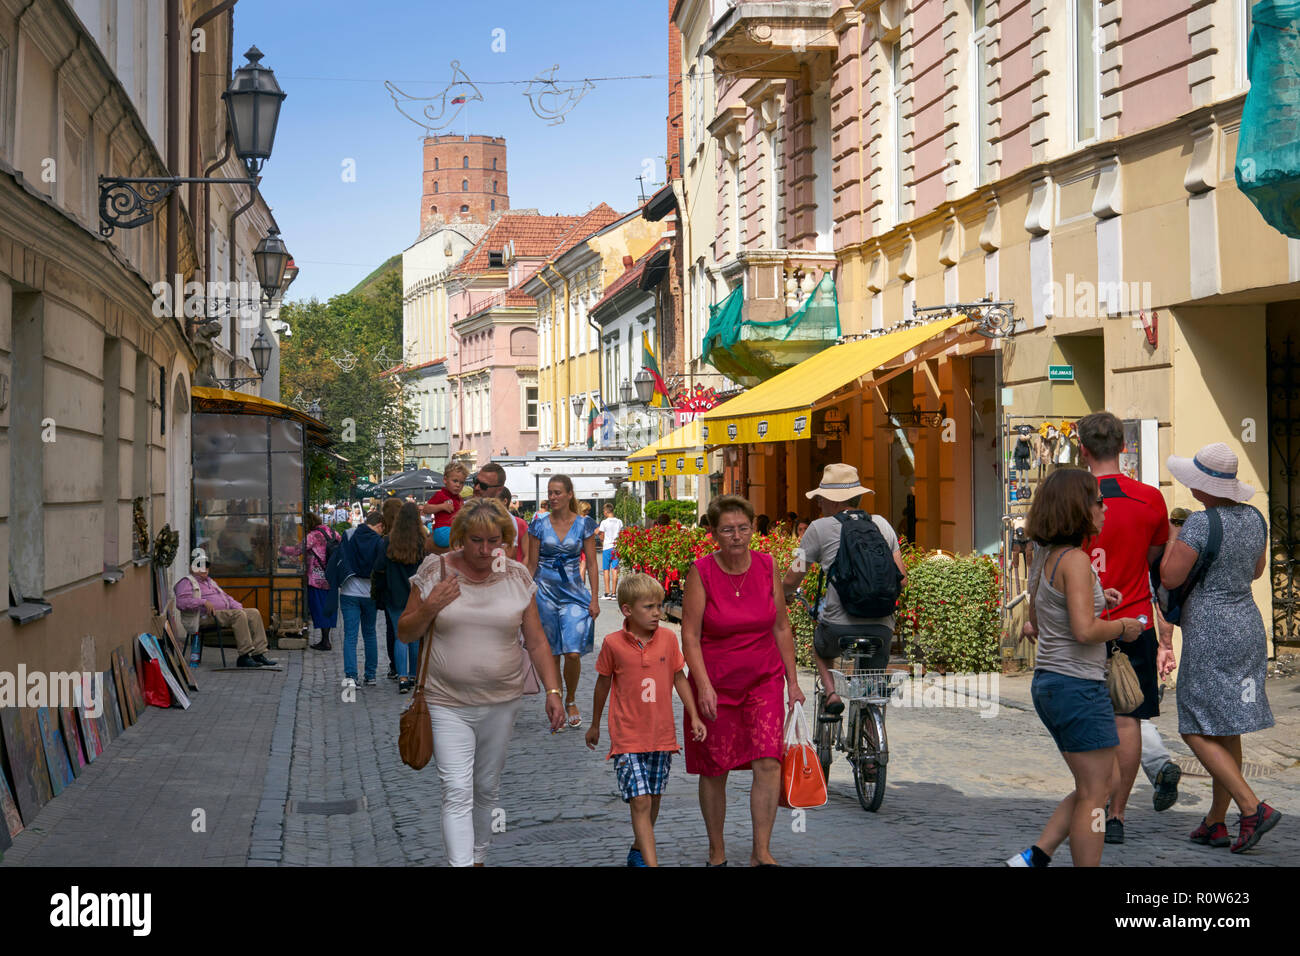 A busy Pilies Street, Vilnius, Lithuania Stock Photo